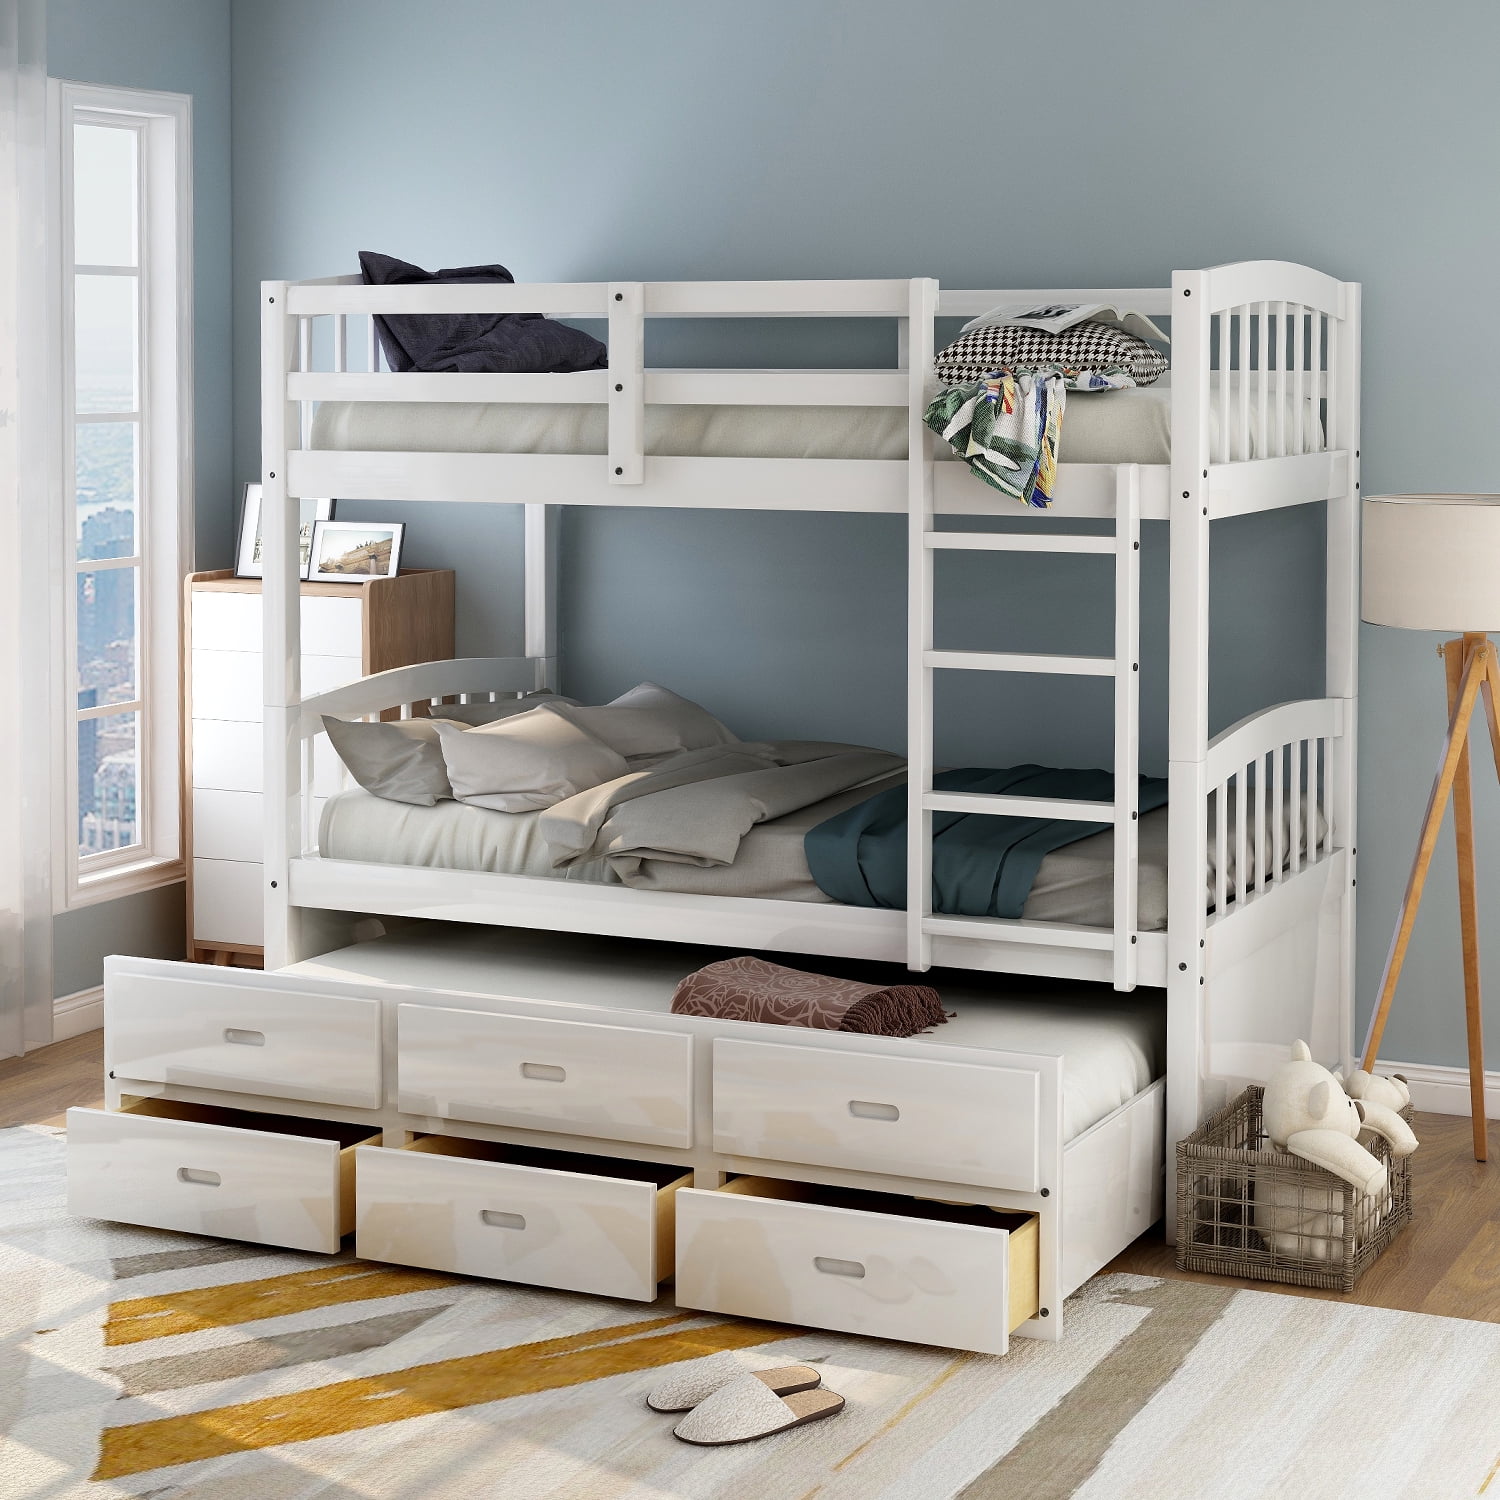 Euroco Twin Over Wood Bunk Bed, White Twin Bunk Beds With Drawers